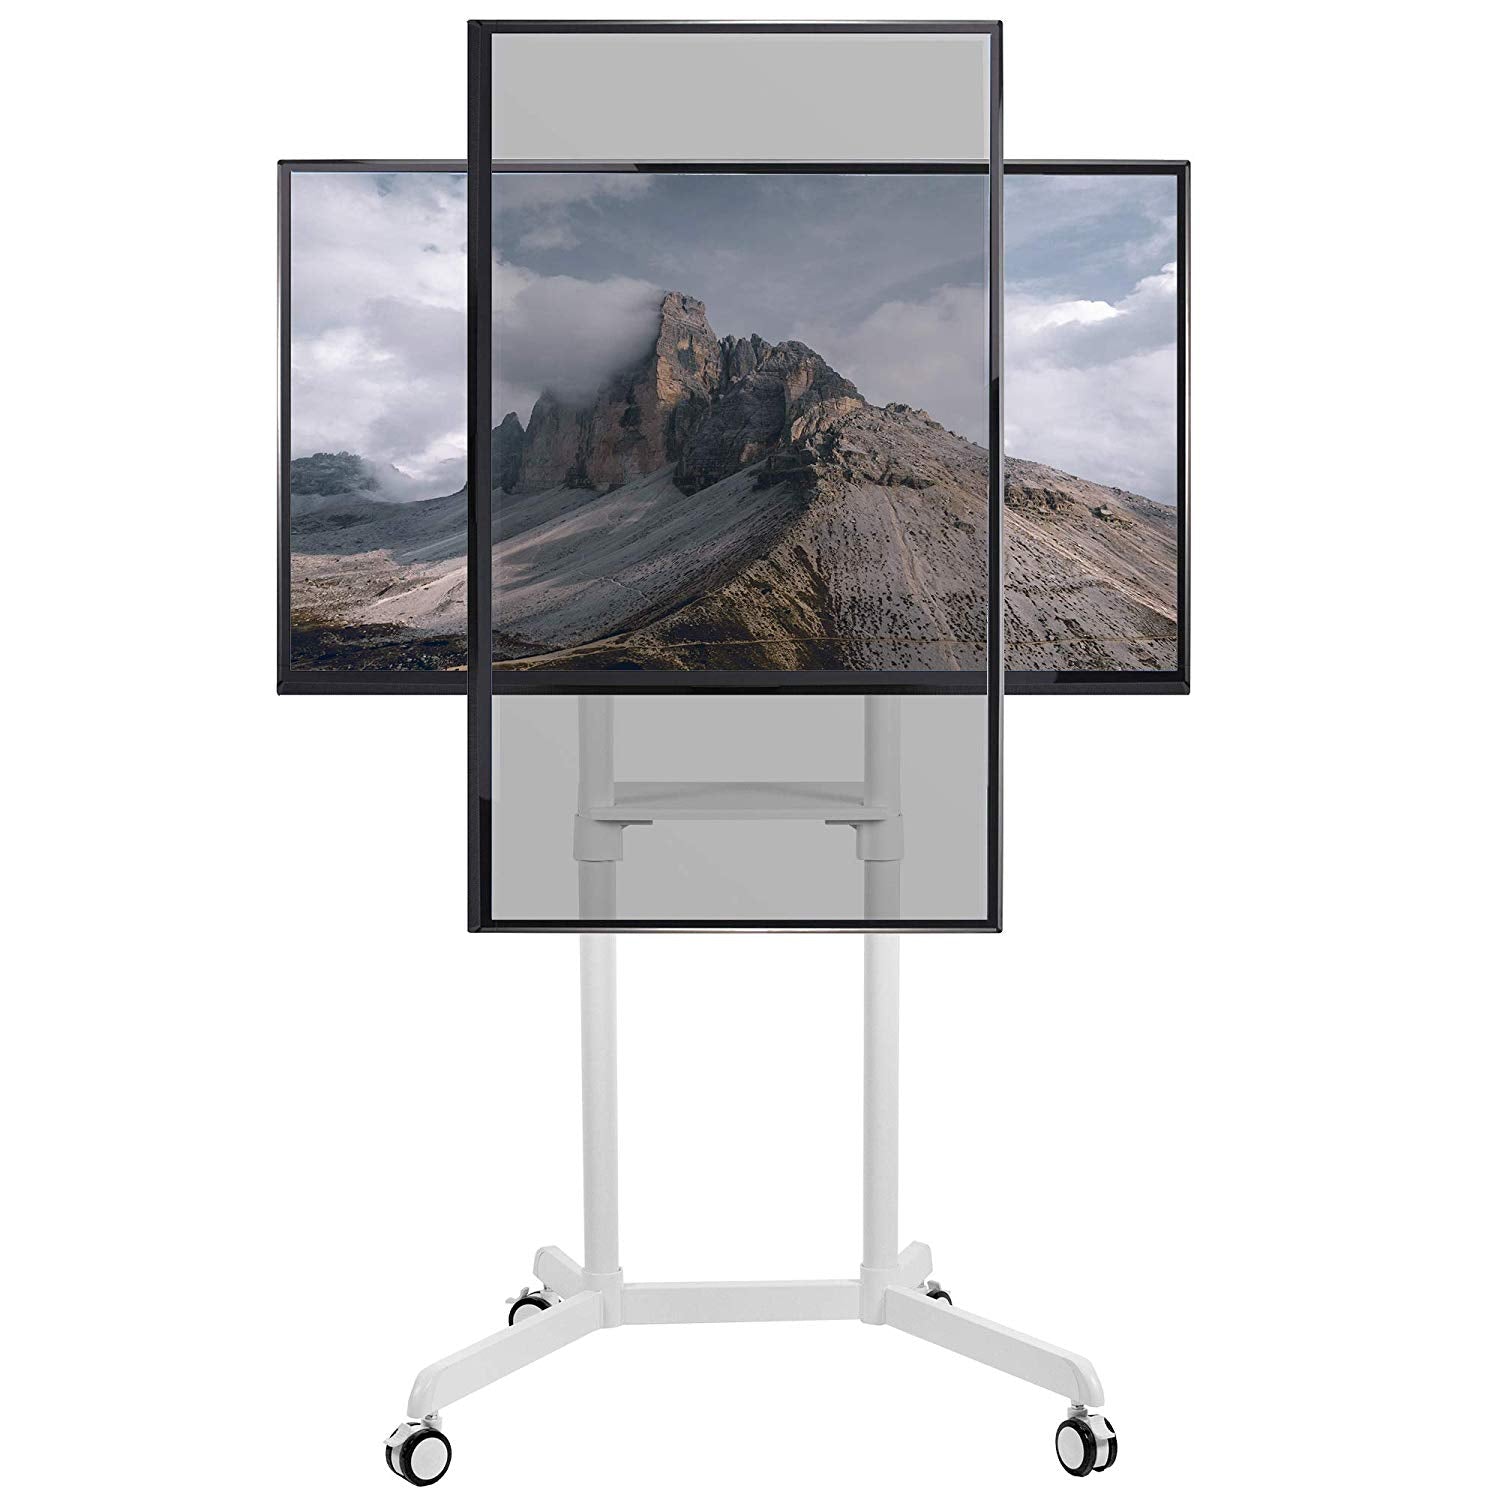 STAND TV02PW 1800x1800 ?v=1582227716